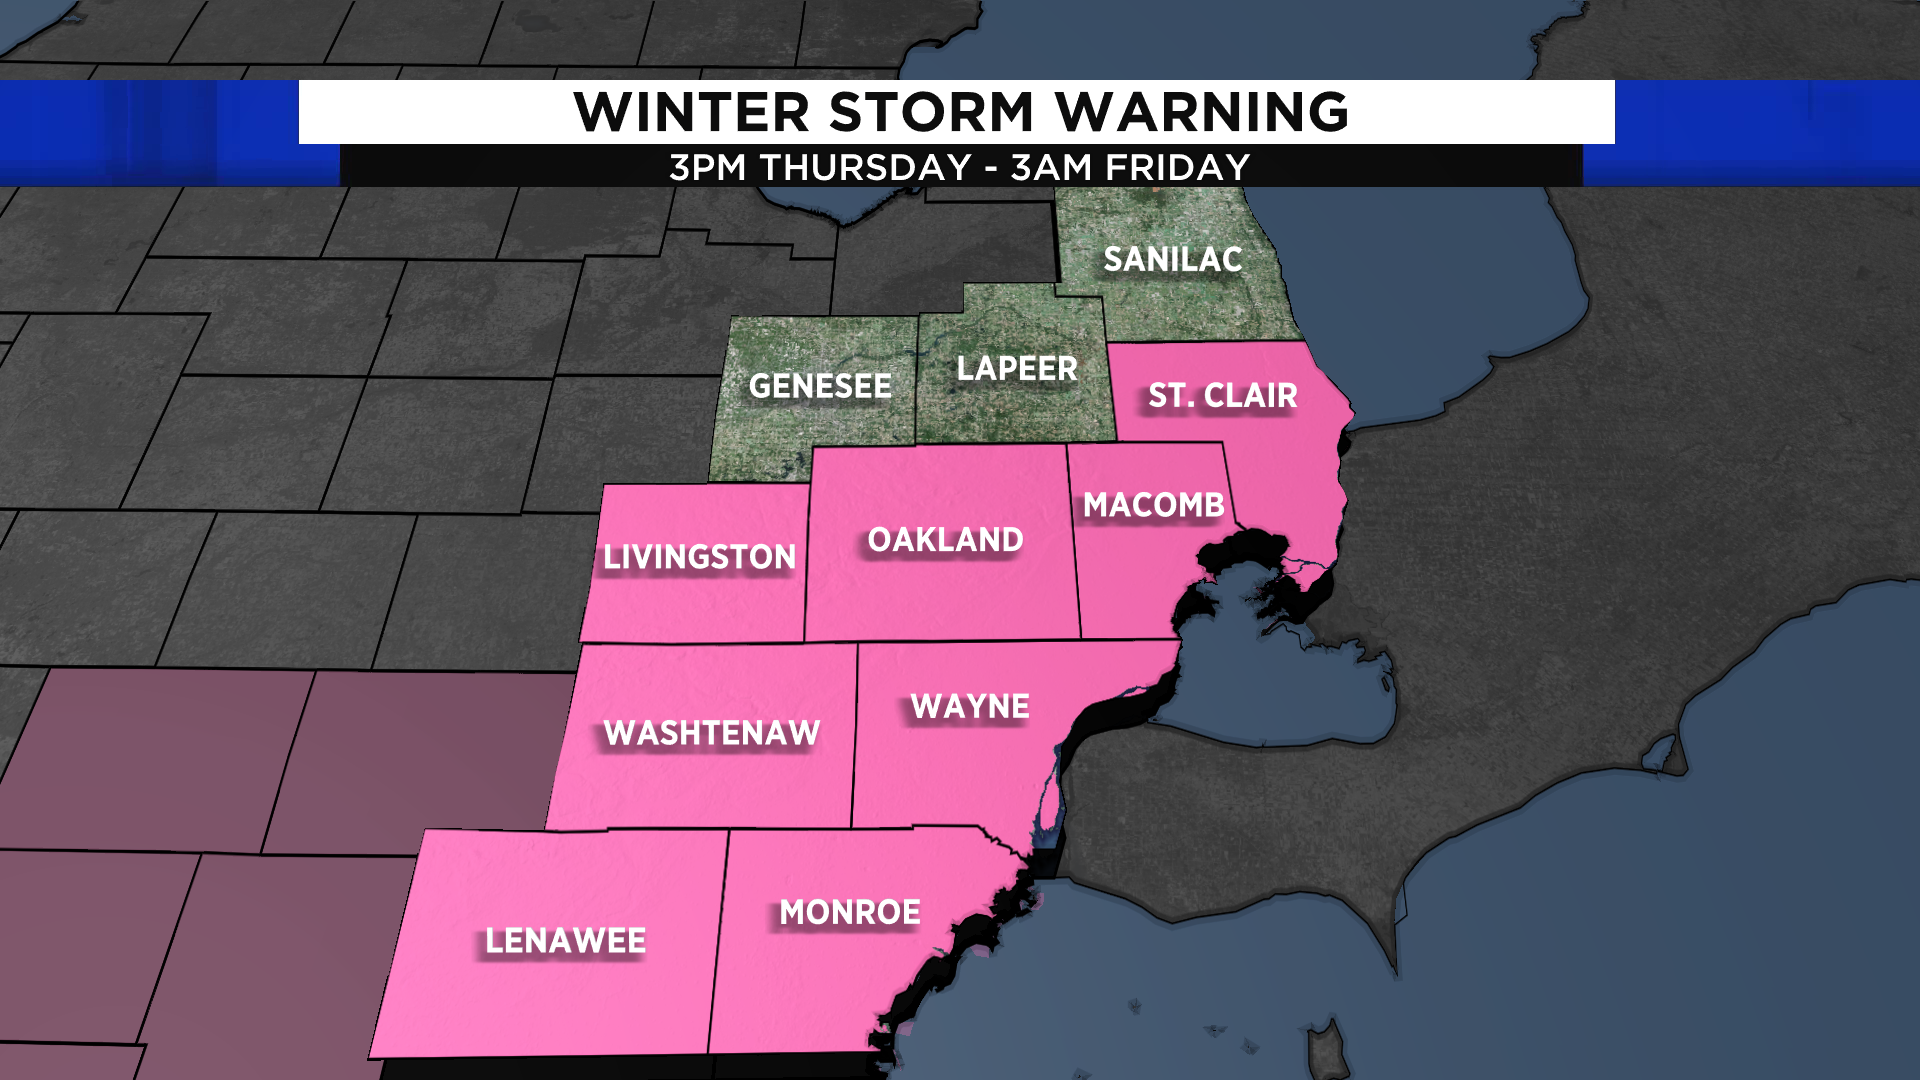 Upgrade to Winter Storm Warning for major southeast Michigan cities